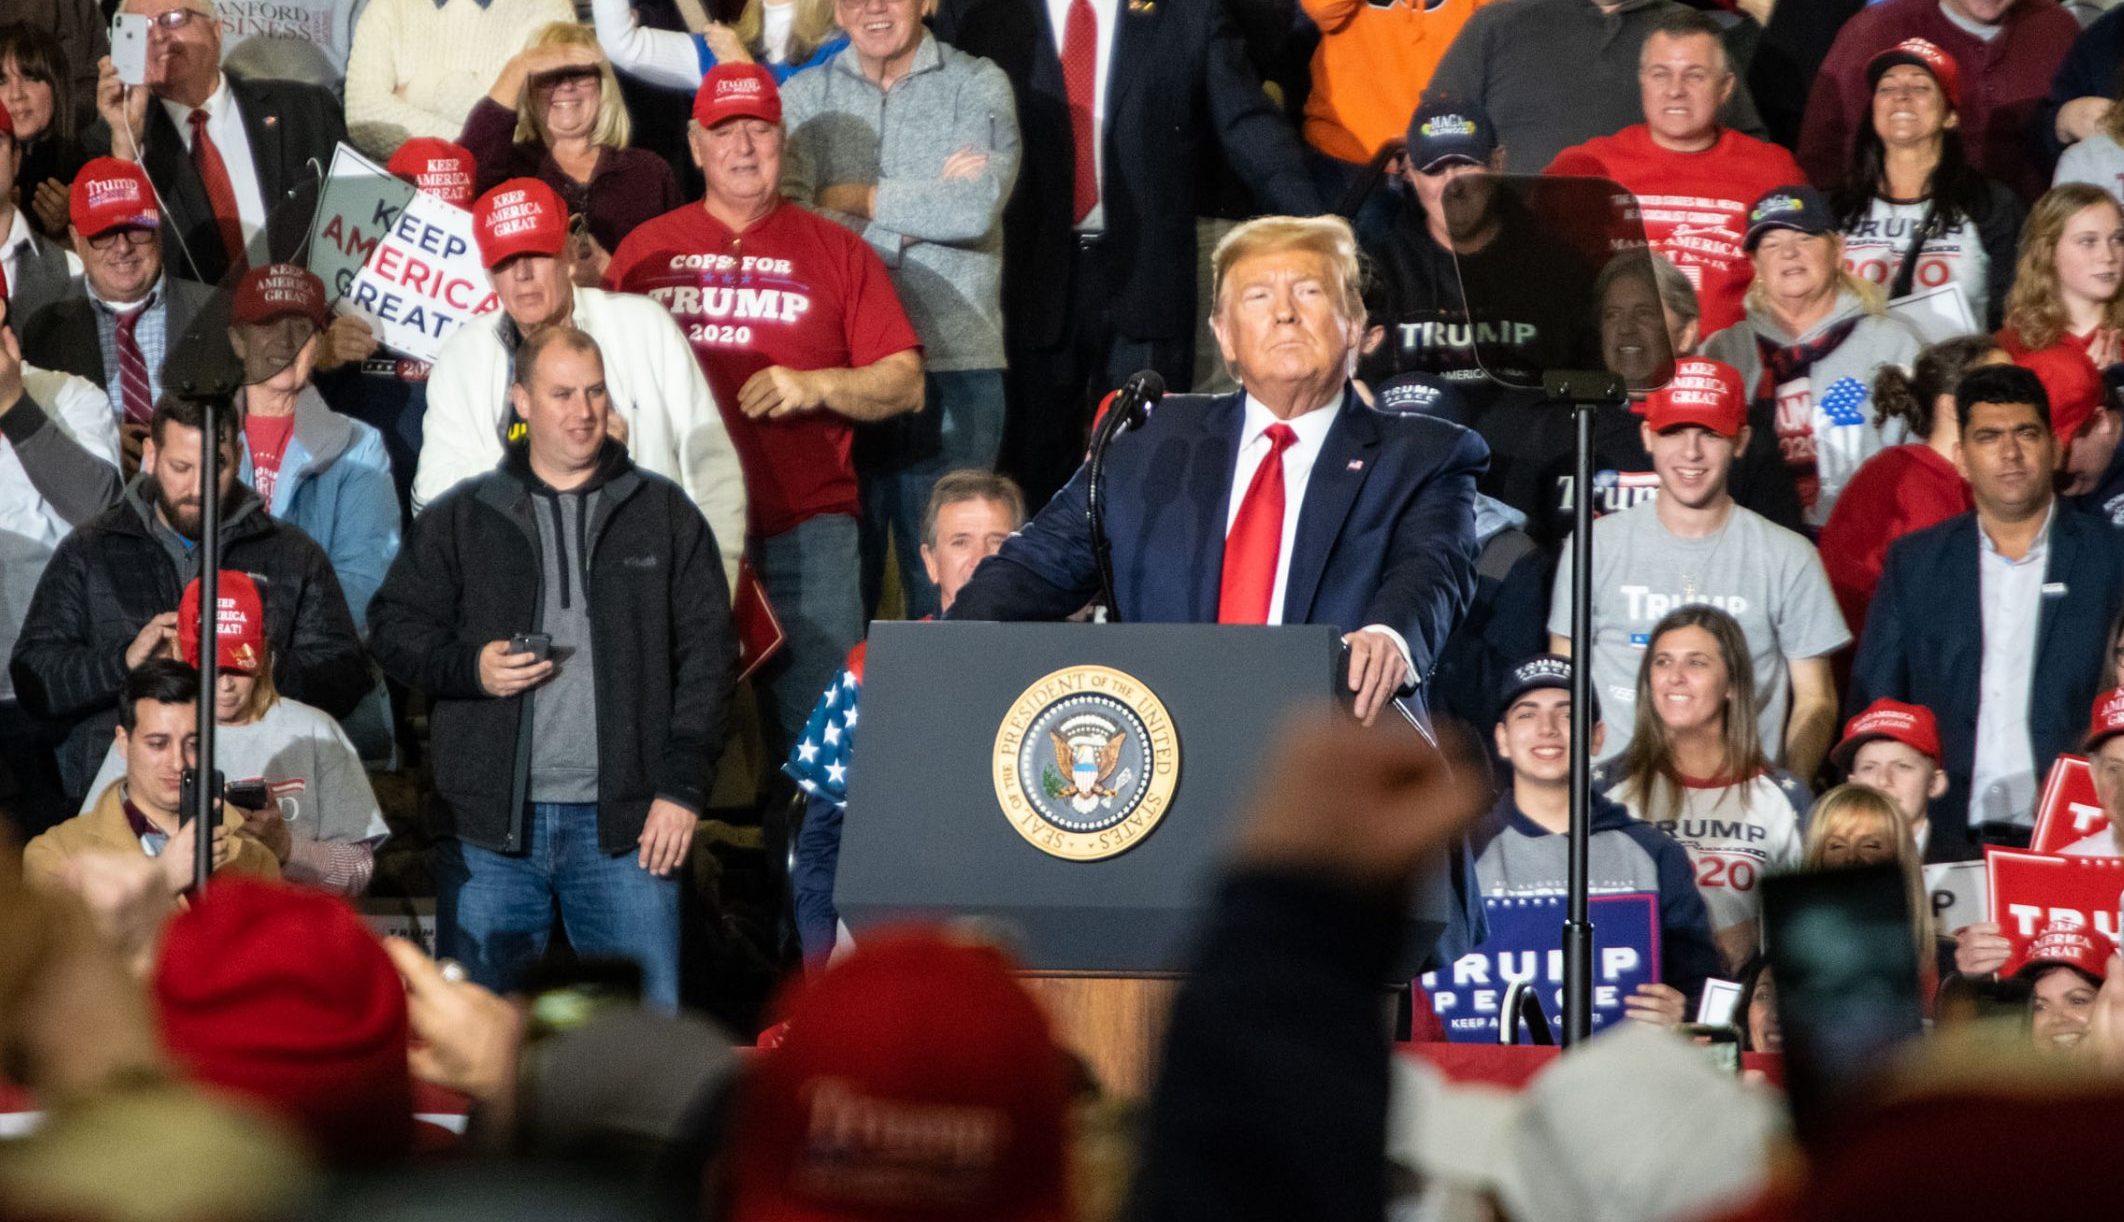 President Donald Trump and his supporters gather at the Wildwoods Convention Center, Jan. 28, 2020. (Photo: Daniel Nee/Shorebeat)